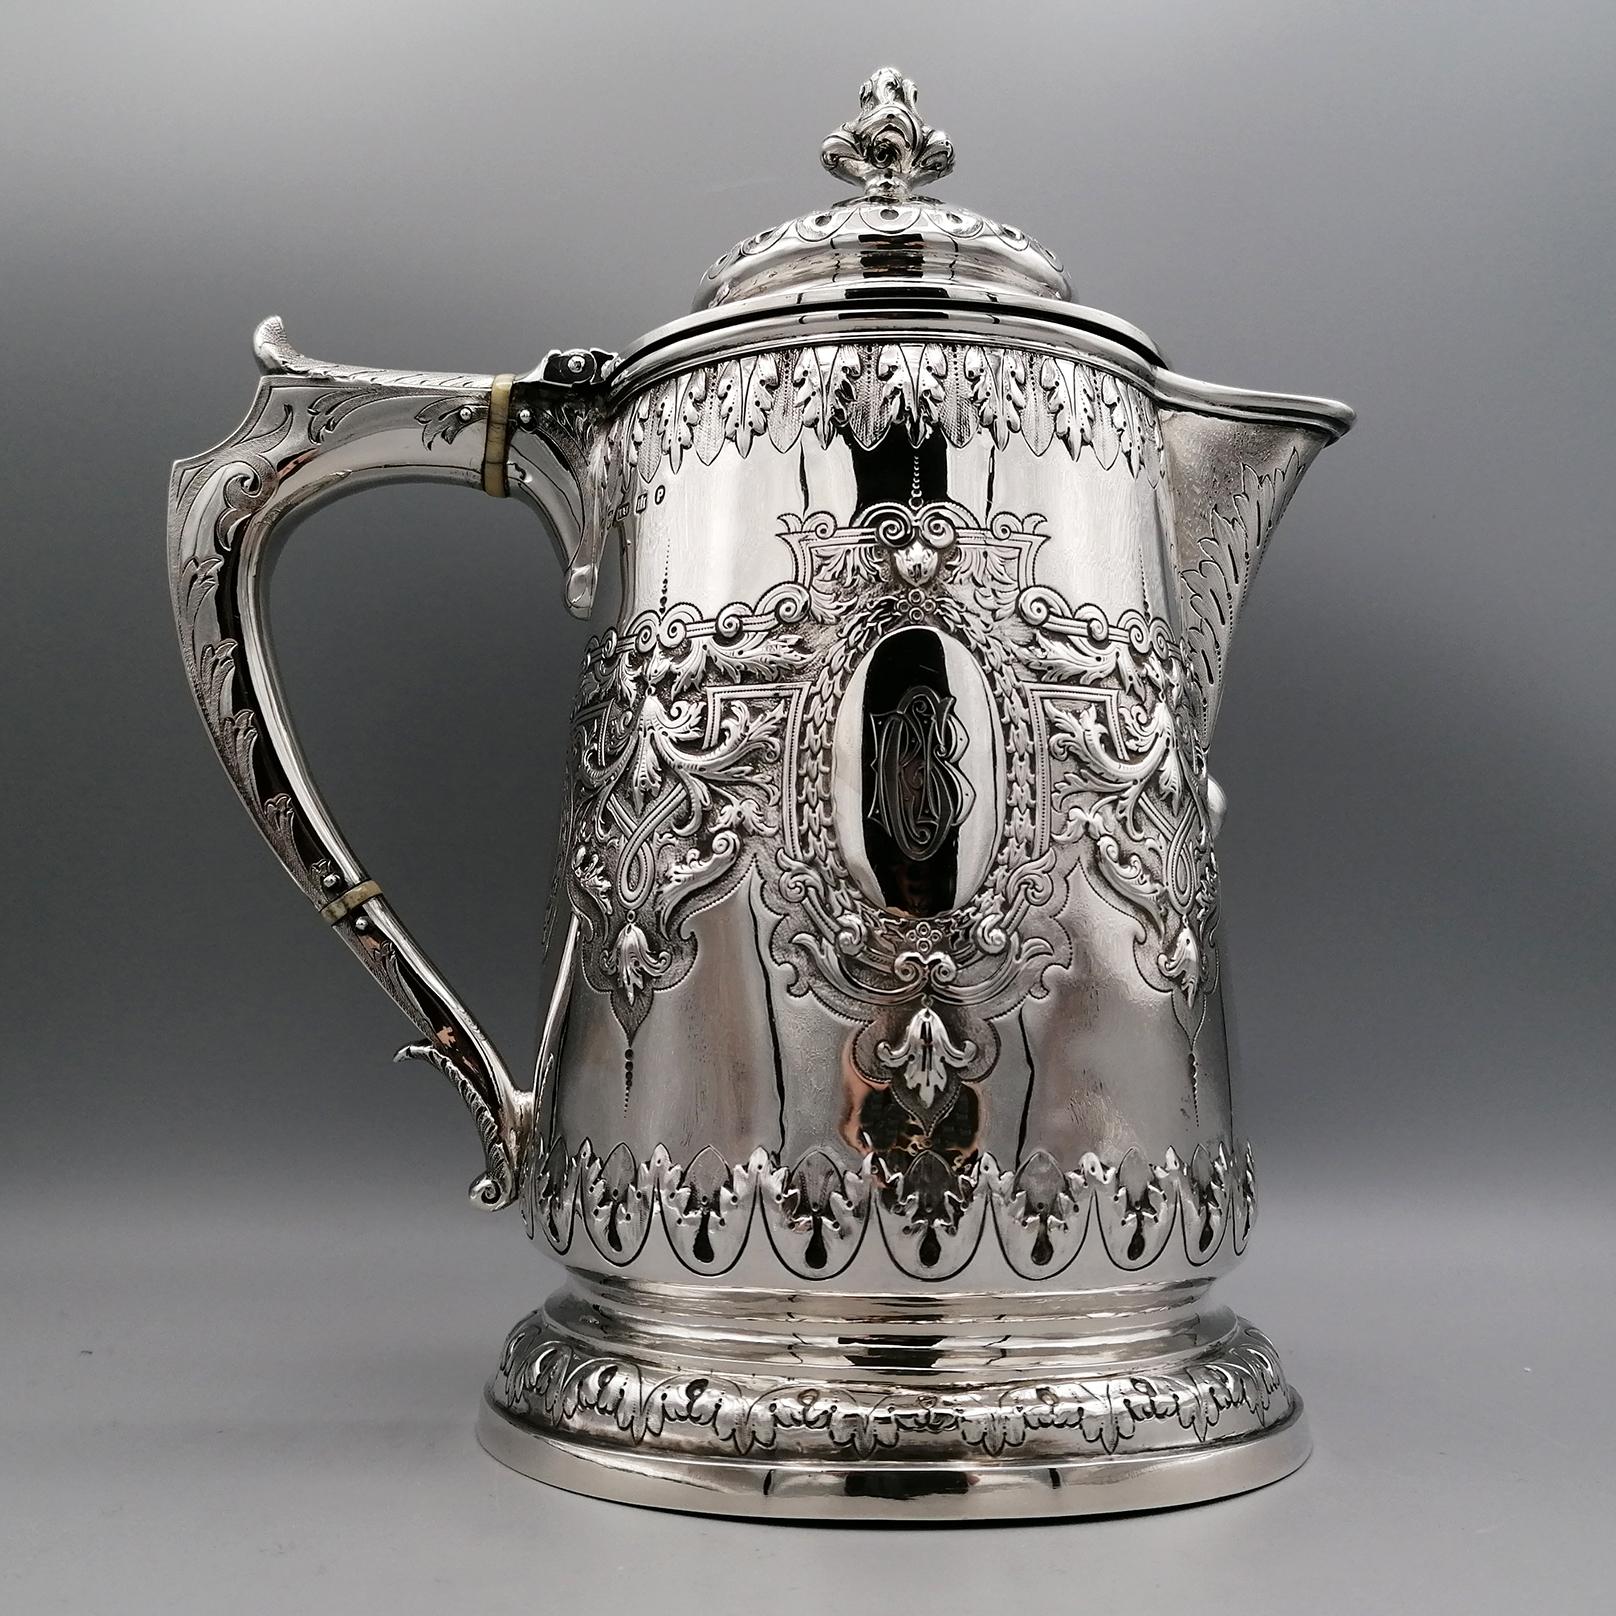 Hand-Crafted 19th Century Victorian Antique Sterling Silver Hot Water Jug